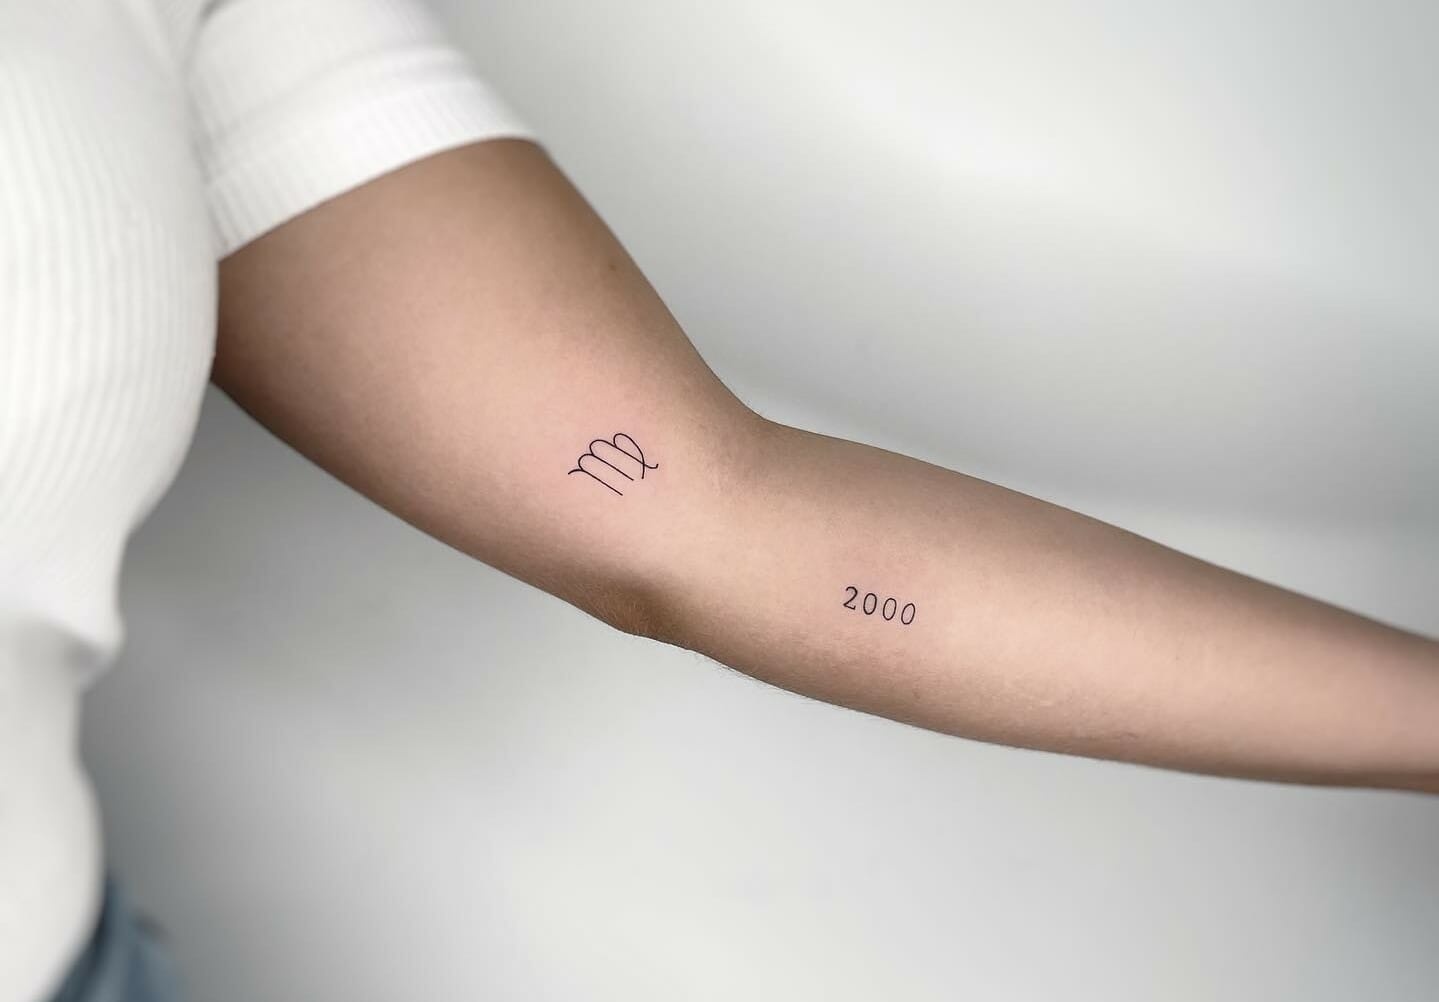 Top 10 2000 Tattoo Ideas That Will Blow Your Mind!

+2023